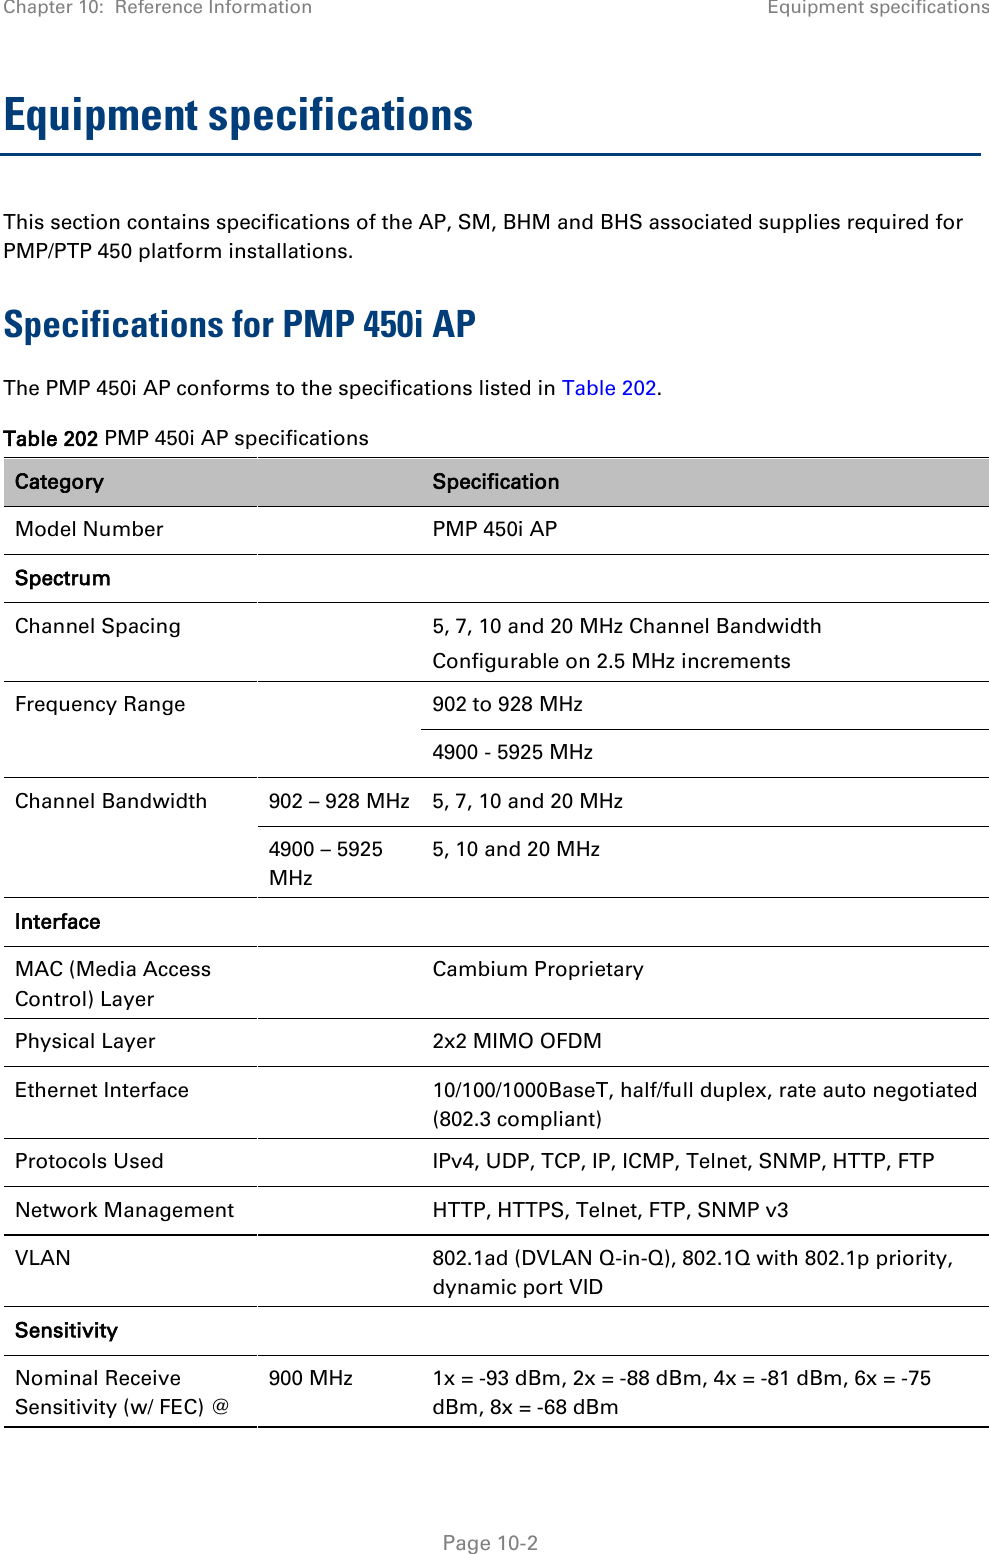 Chapter 10:  Reference Information Equipment specifications   Page 10-2 Equipment specifications This section contains specifications of the AP, SM, BHM and BHS associated supplies required for PMP/PTP 450 platform installations. Specifications for PMP 450i AP The PMP 450i AP conforms to the specifications listed in Table 202. Table 202 PMP 450i AP specifications Category  Specification Model Number    PMP 450i AP Spectrum    Channel Spacing    5, 7, 10 and 20 MHz Channel Bandwidth Configurable on 2.5 MHz increments Frequency Range    902 to 928 MHz 4900 - 5925 MHz Channel Bandwidth 902 – 928 MHz 5, 7, 10 and 20 MHz 4900 – 5925 MHz 5, 10 and 20 MHz Interface    MAC (Media Access Control) Layer  Cambium Proprietary Physical Layer    2x2 MIMO OFDM Ethernet Interface    10/100/1000BaseT, half/full duplex, rate auto negotiated (802.3 compliant) Protocols Used    IPv4, UDP, TCP, IP, ICMP, Telnet, SNMP, HTTP, FTP Network Management    HTTP, HTTPS, Telnet, FTP, SNMP v3 VLAN    802.1ad (DVLAN Q-in-Q), 802.1Q with 802.1p priority, dynamic port VID Sensitivity     Nominal Receive Sensitivity (w/ FEC) @ 900 MHz 1x = -93 dBm, 2x = -88 dBm, 4x = -81 dBm, 6x = -75 dBm, 8x = -68 dBm 